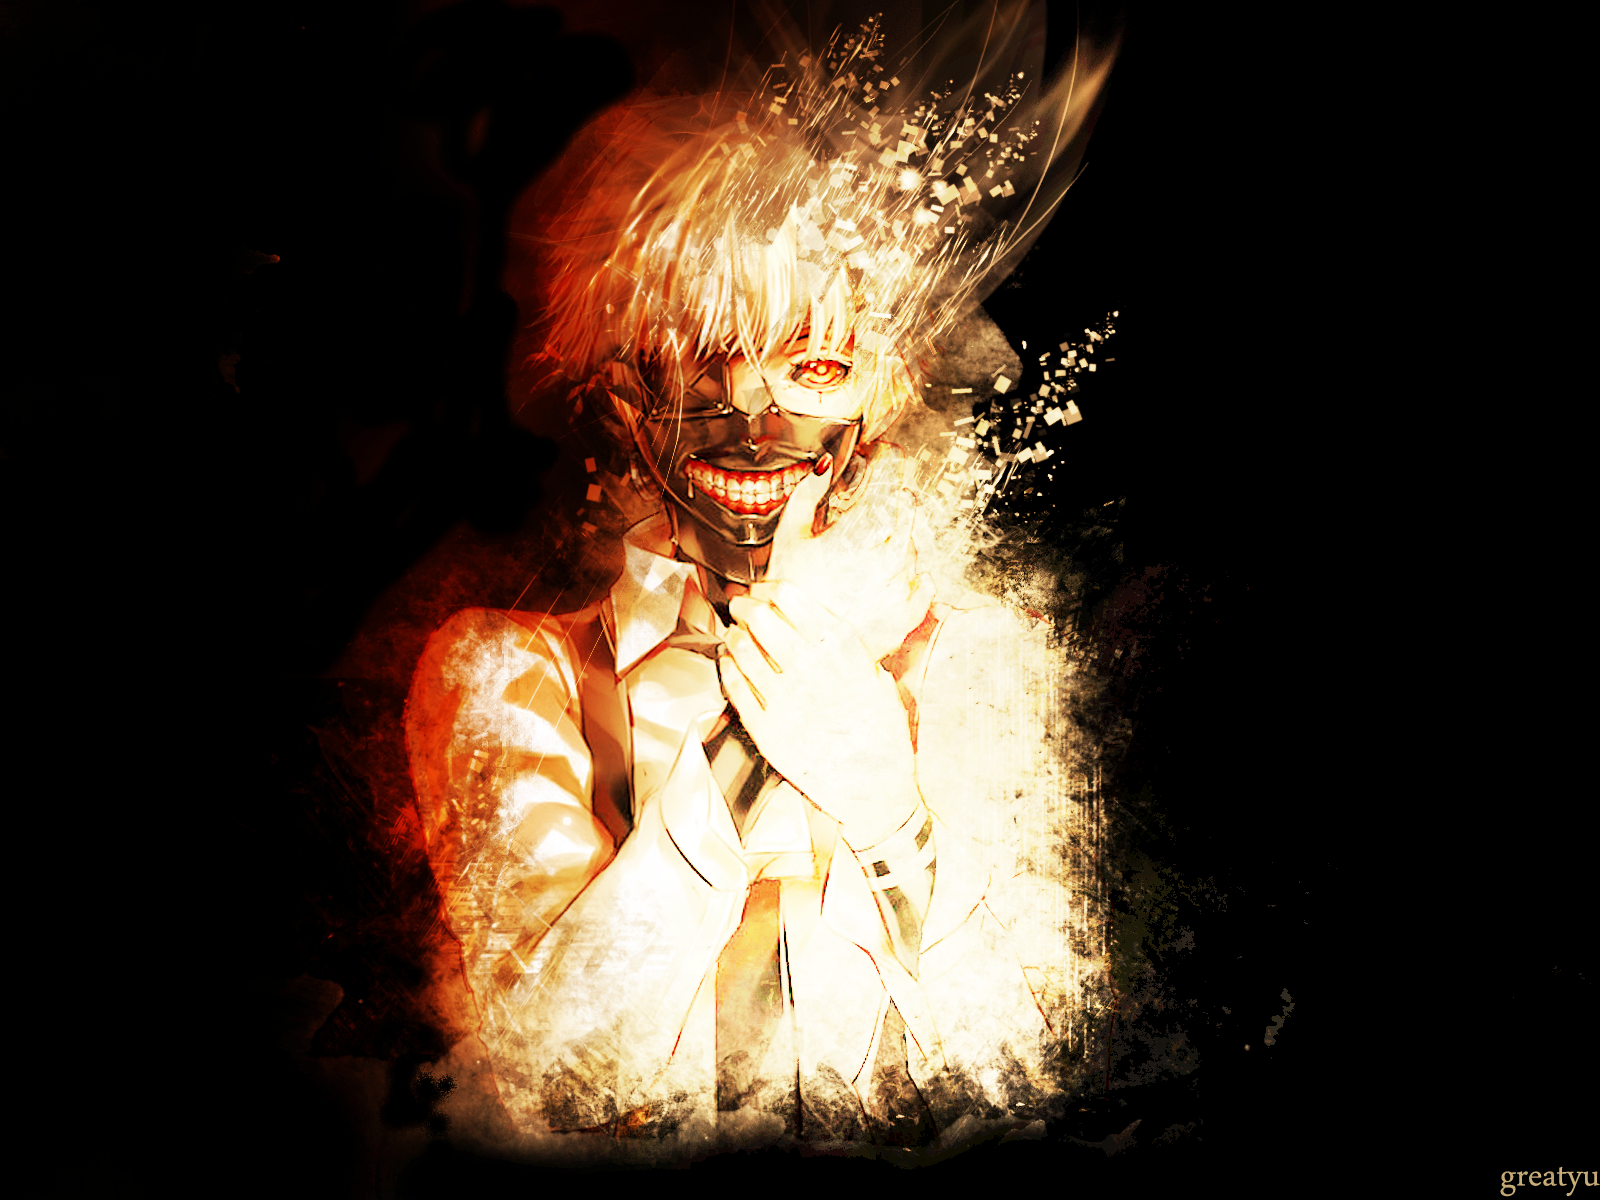 290 Tokyo Ghoul HD Wallpapers | Backgrounds - Wallpaper Abyss - Page 2